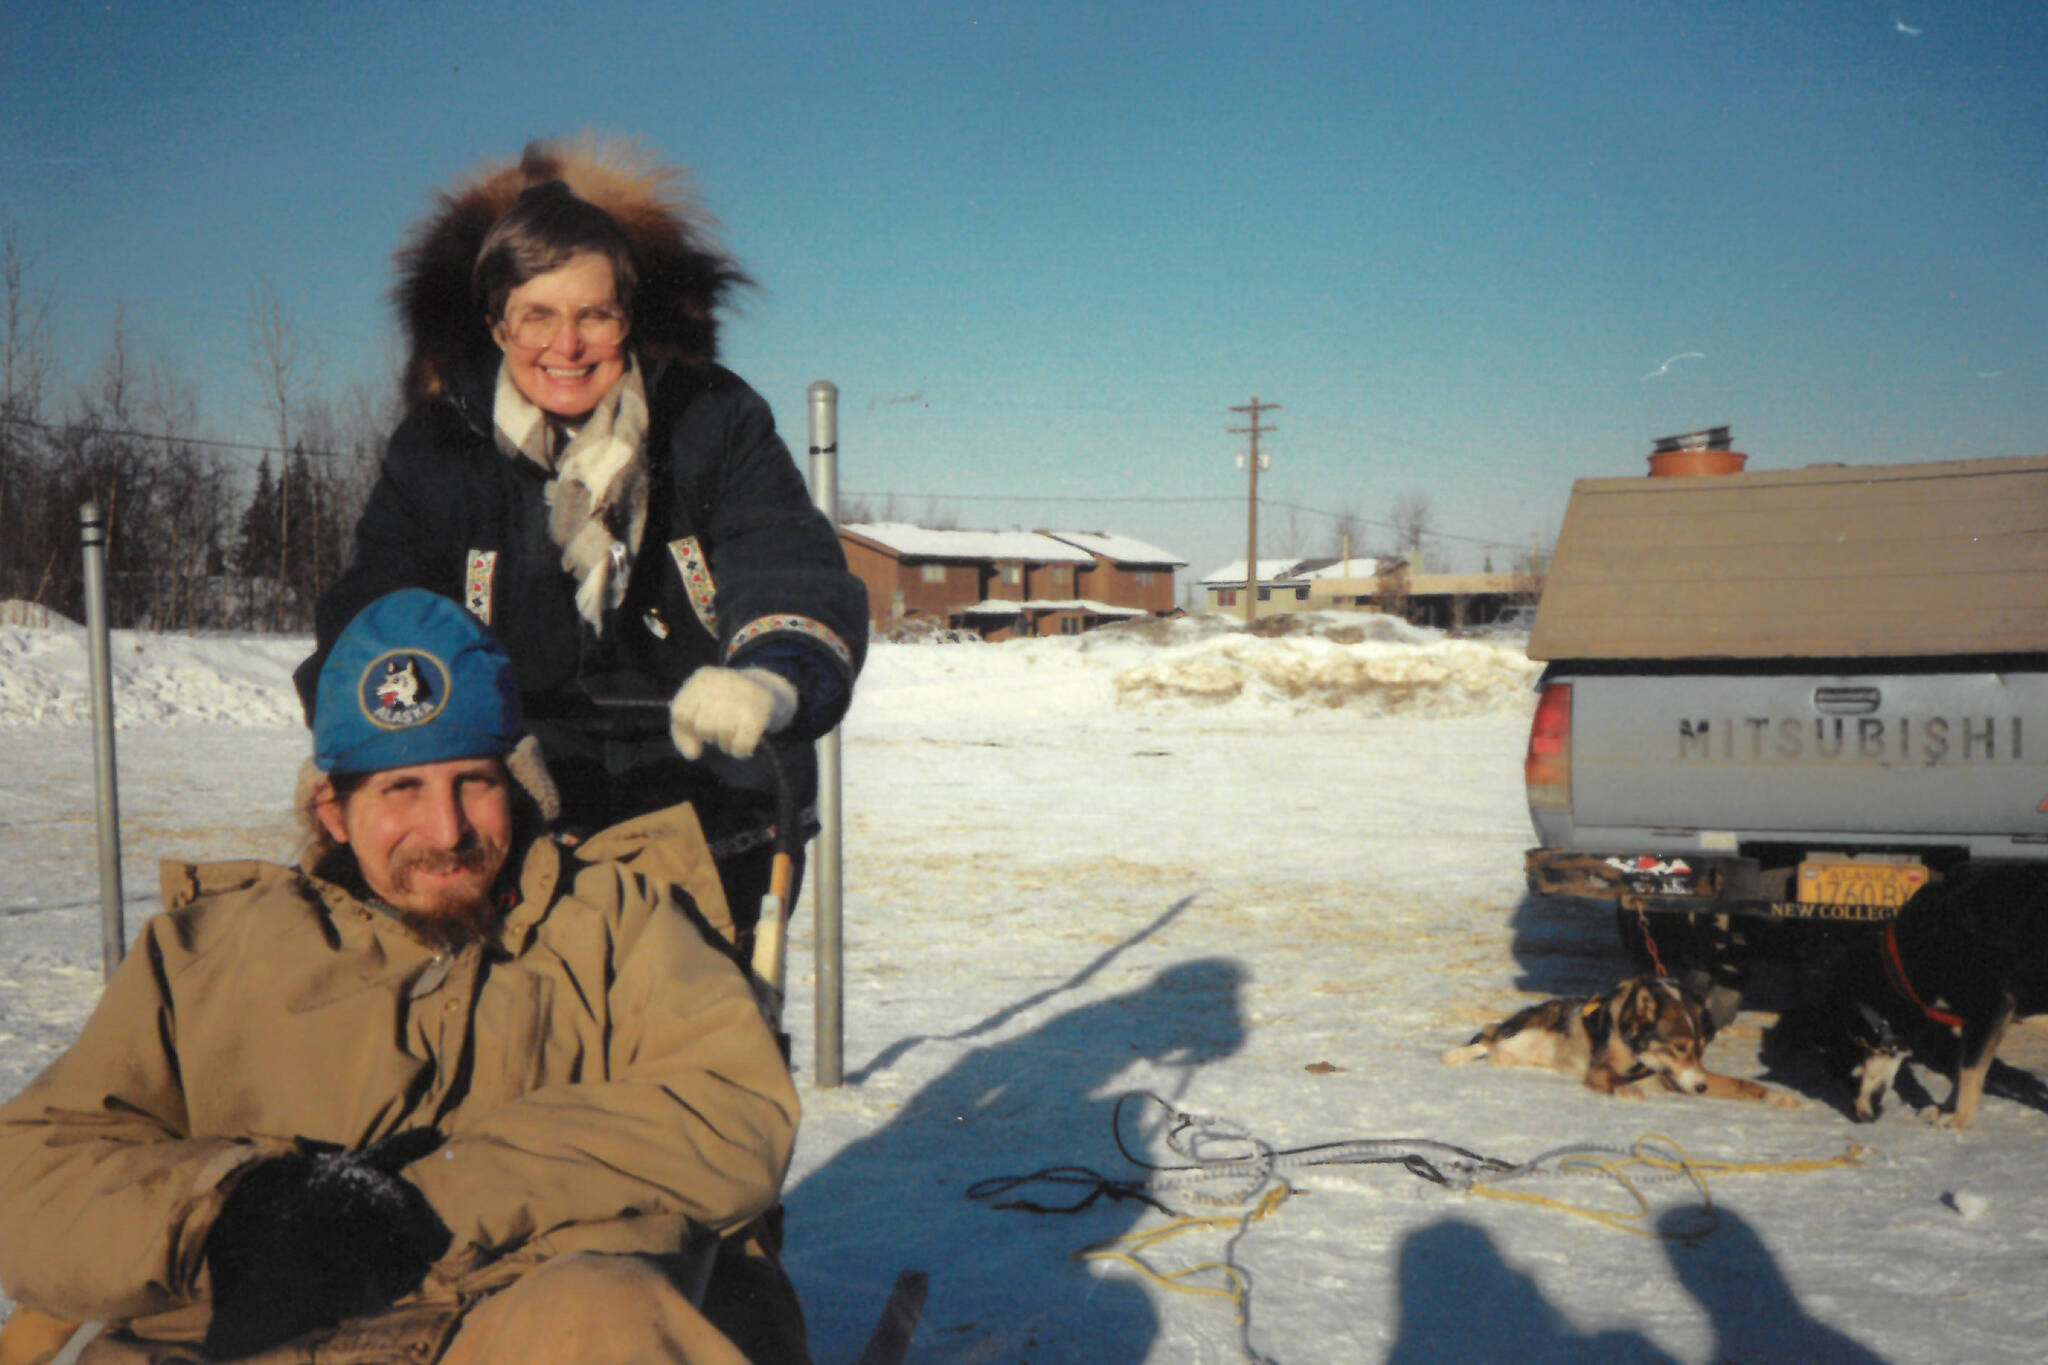 Michael Armstrong, seated, in sled, gives his mother, Sylvia Jander, the unique Alaska experience of driving a sled-dog team in February 1989 in Anchorage, Alaska. (Photo by Jenny Stroyeck)